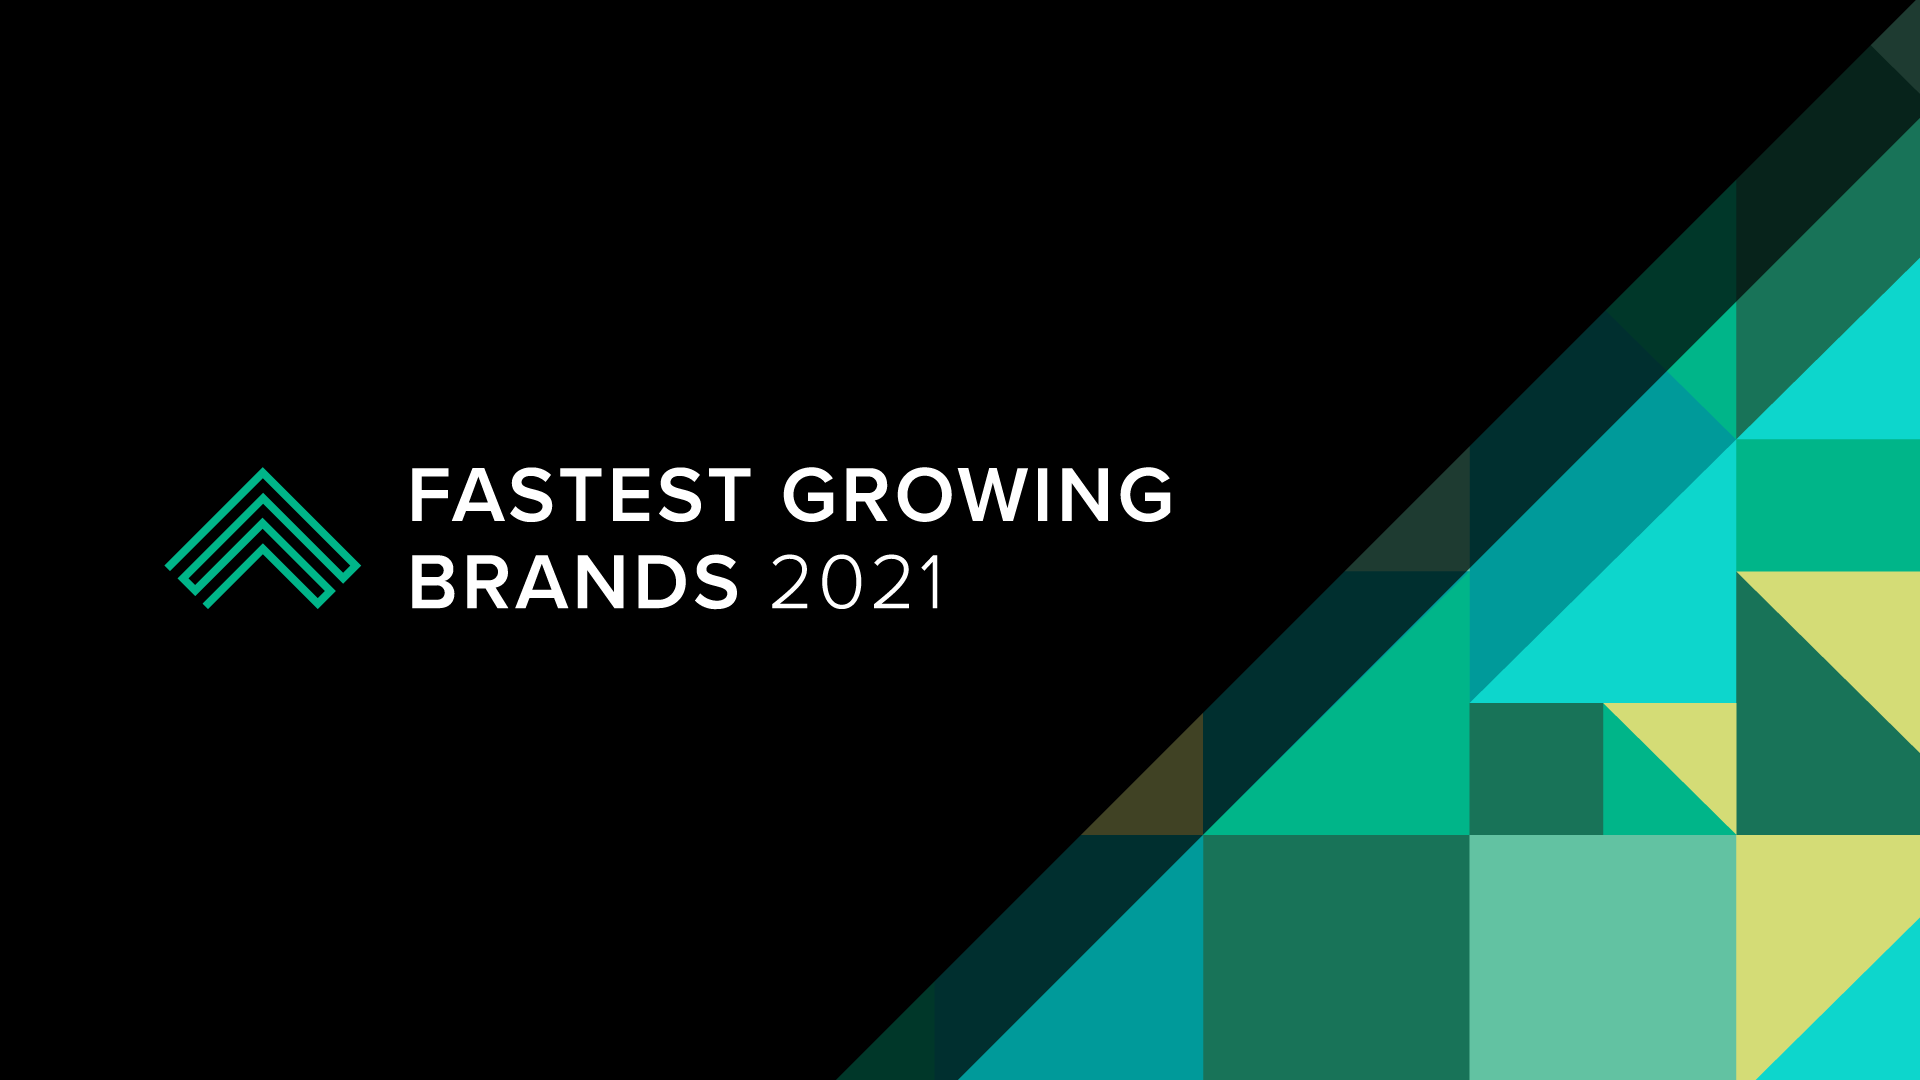 Download the Fastest Growing Brands Report 2021